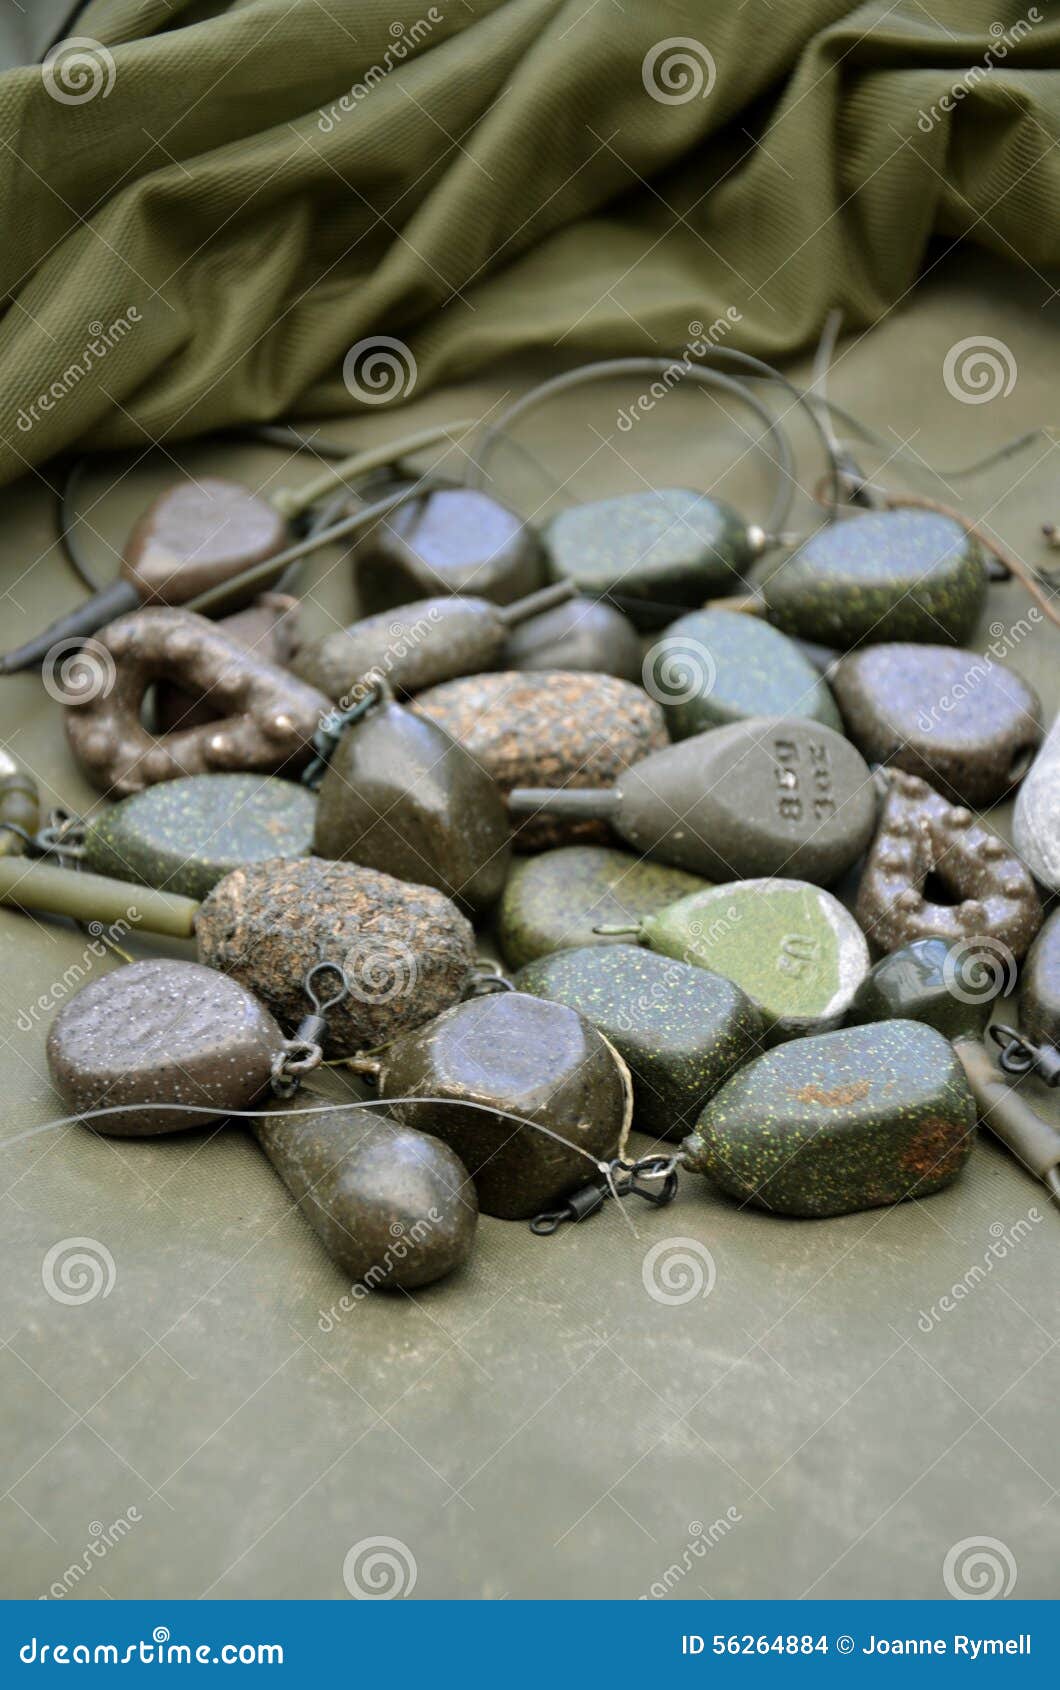 Pile of Various Shaped Carp Fishing Lead Weights Stock Photo